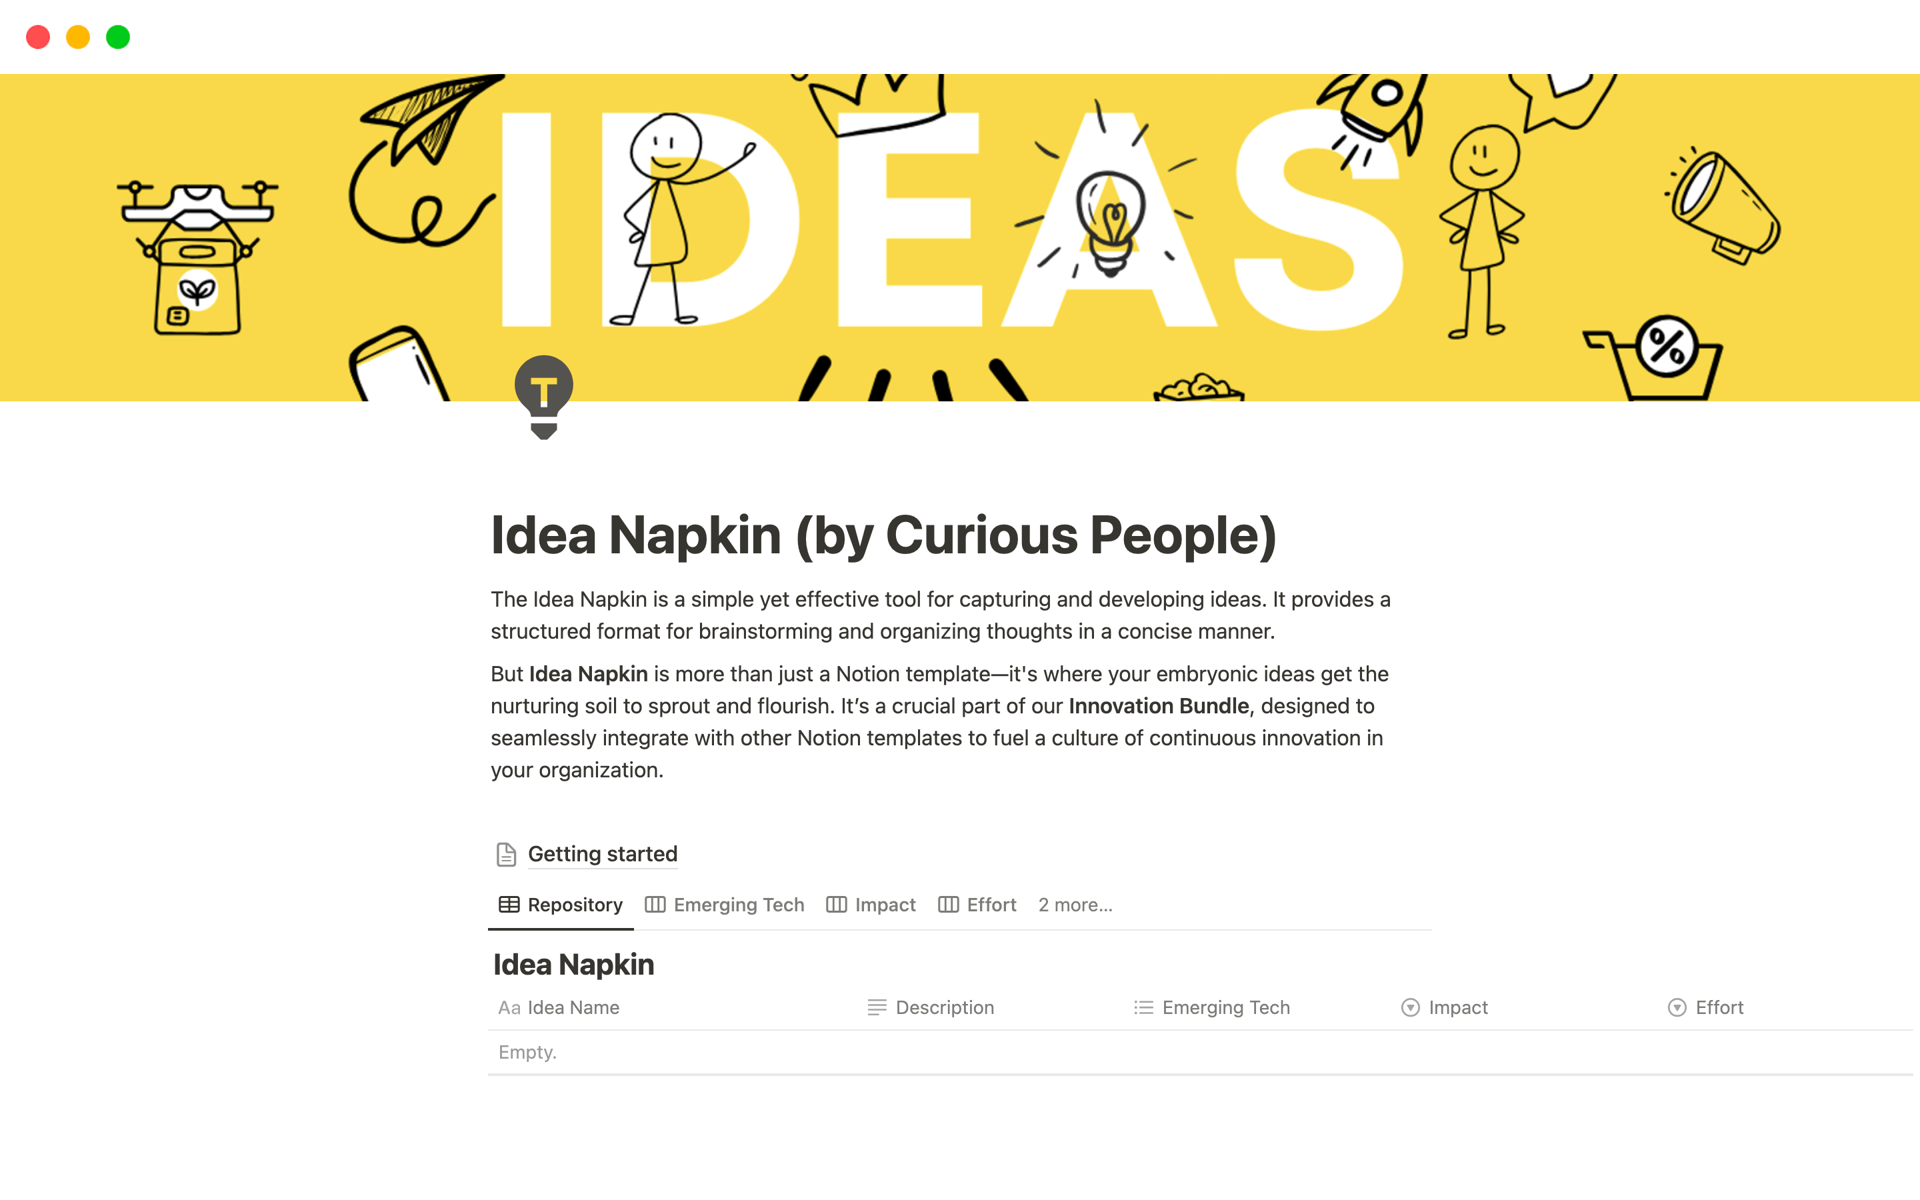 
Idea Napkin, more than a Notion template, is where embryonic ideas find fertile ground to grow. A vital part of our Innovation Bundle, it seamlessly meshes with other templates, fueling a culture of ceaseless innovation in your organization. It's where your ideas blossom.